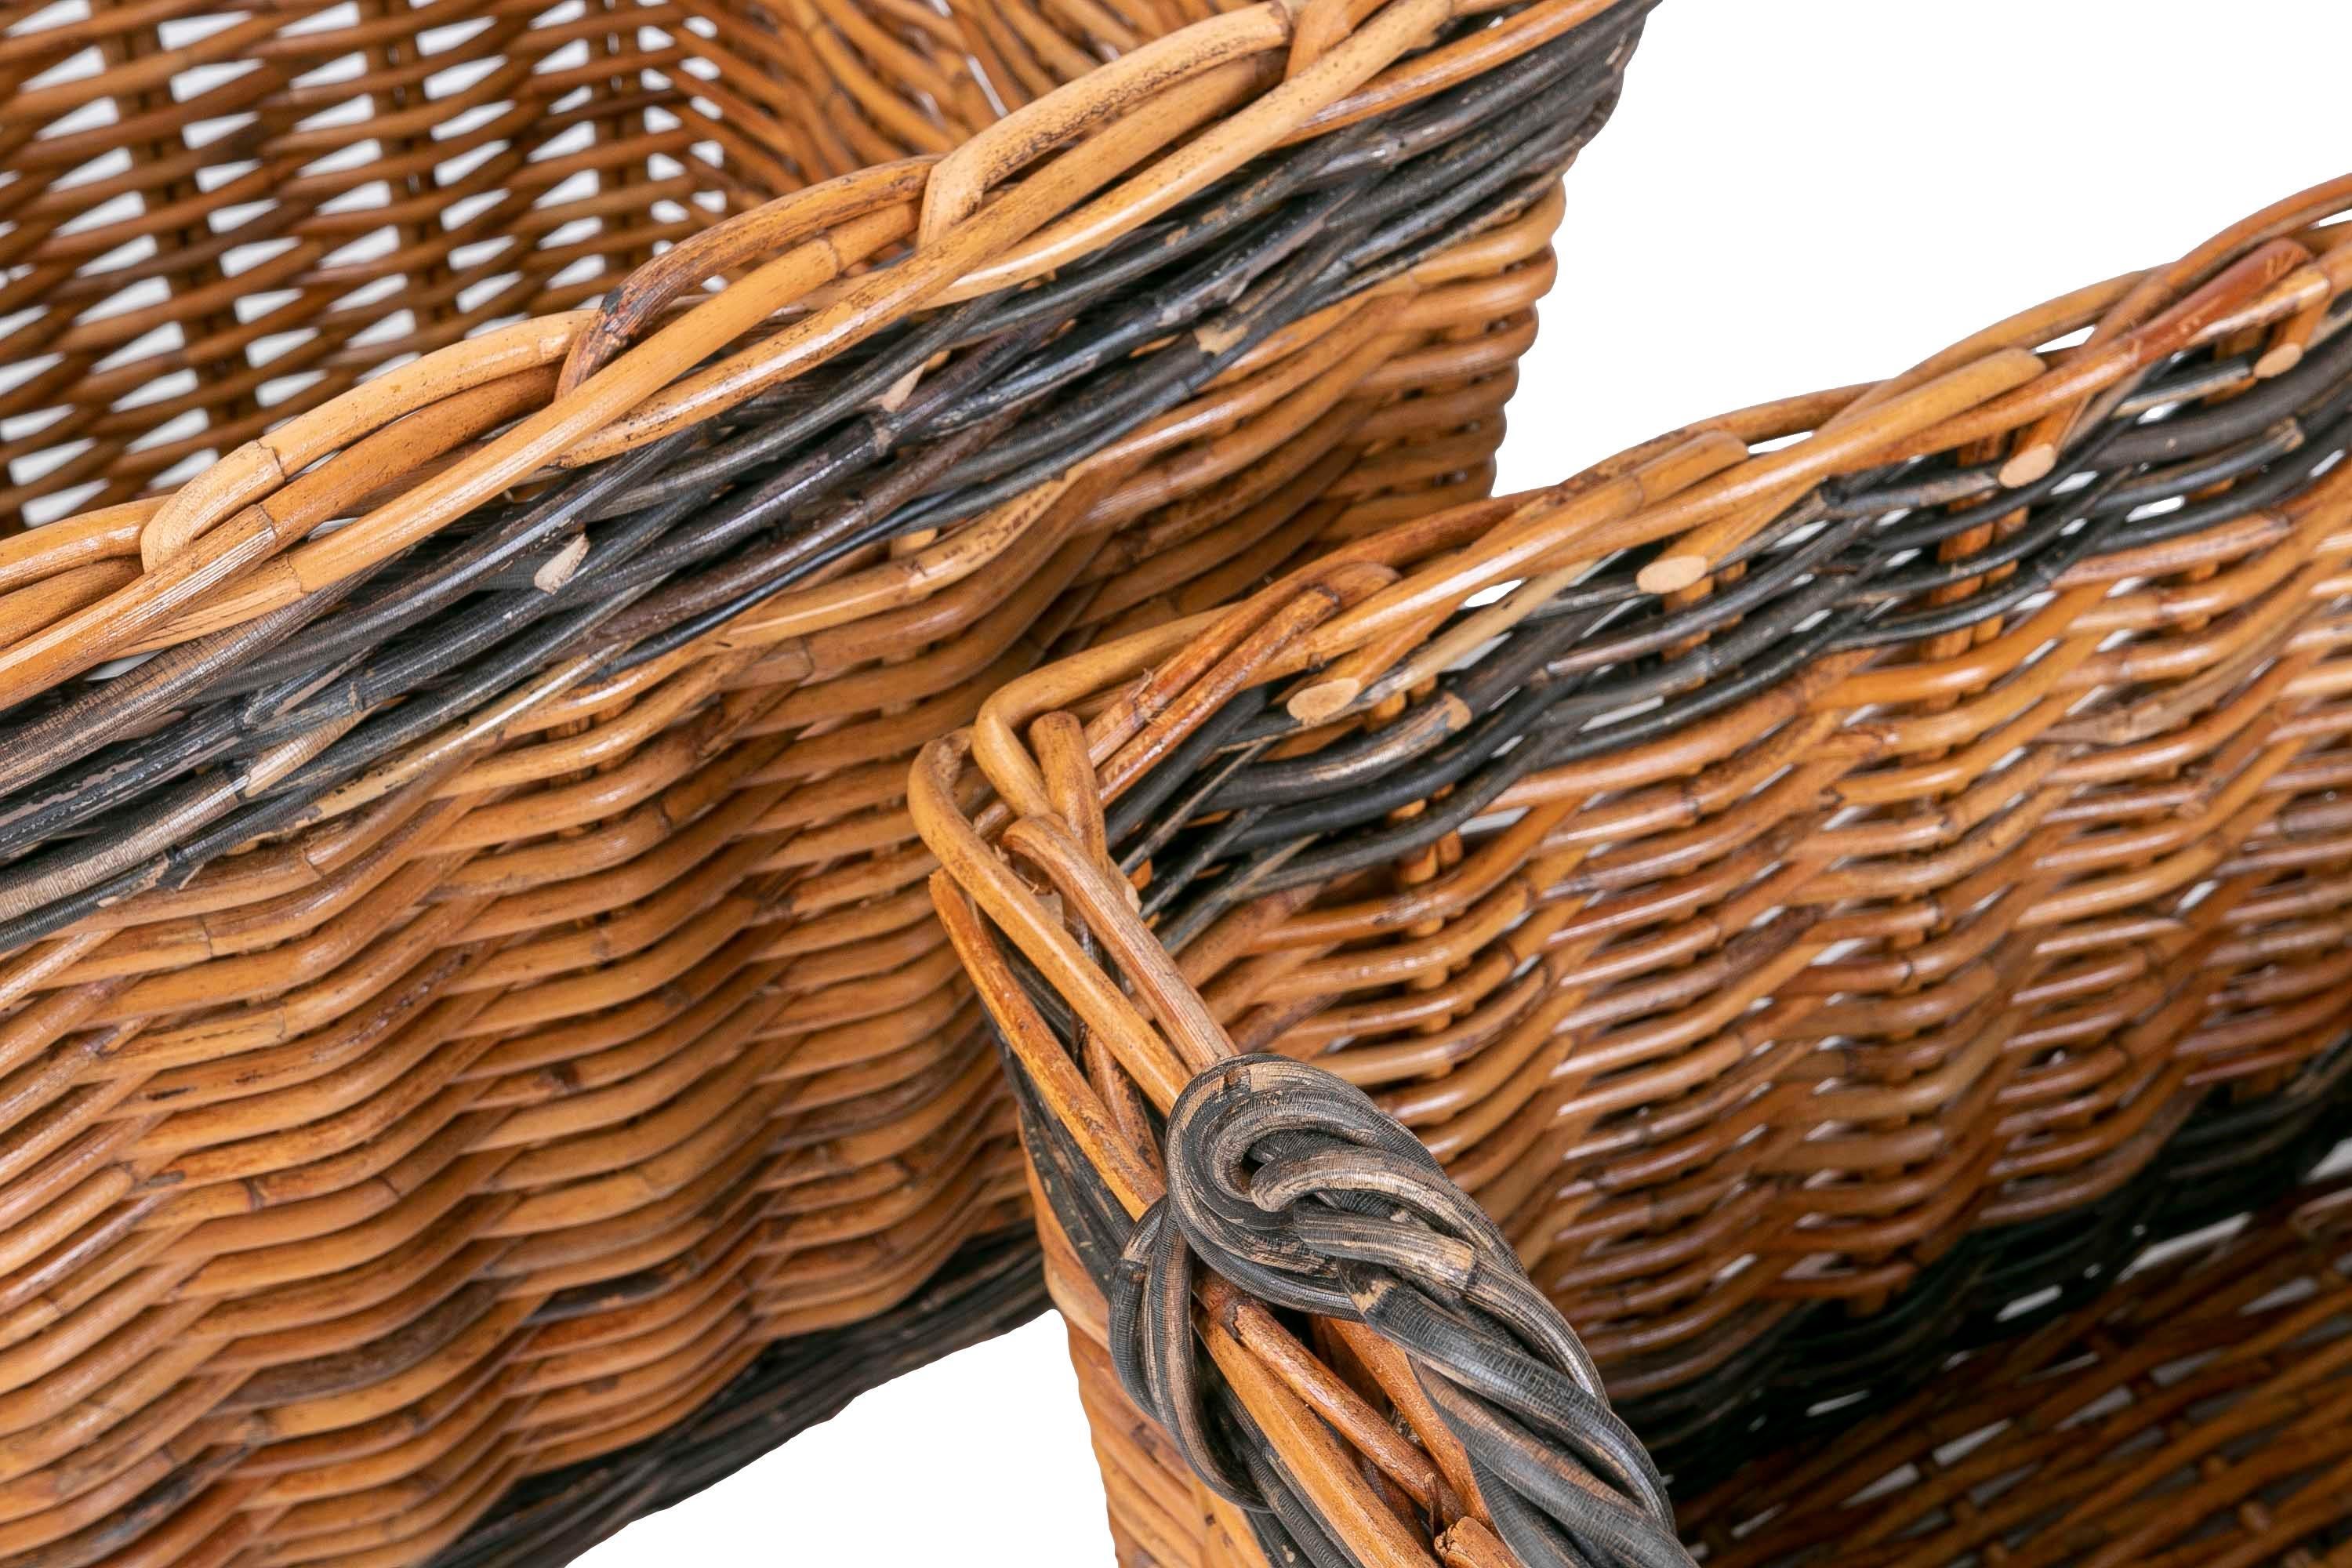 Set Consisting of Three Decorative Wicker Baskets of Different Sizes For Sale 4